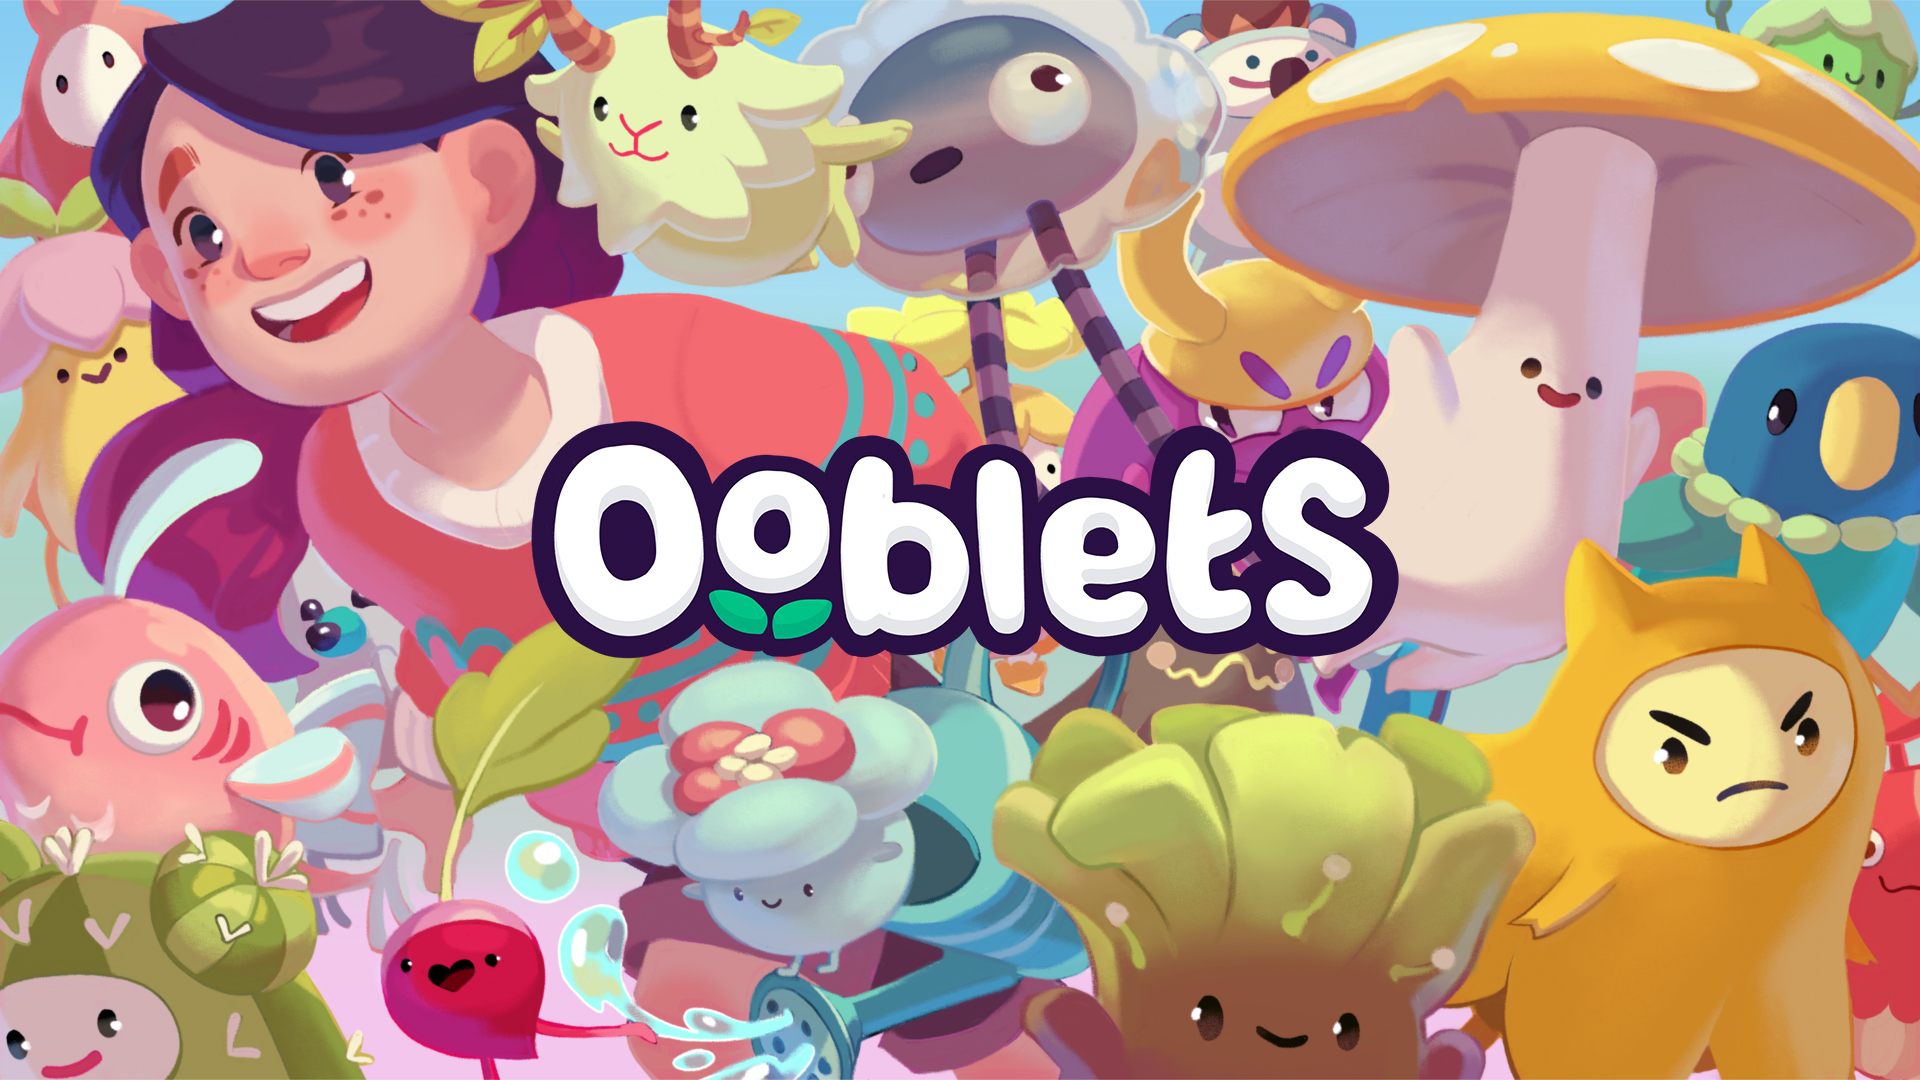 download free ooblets switch